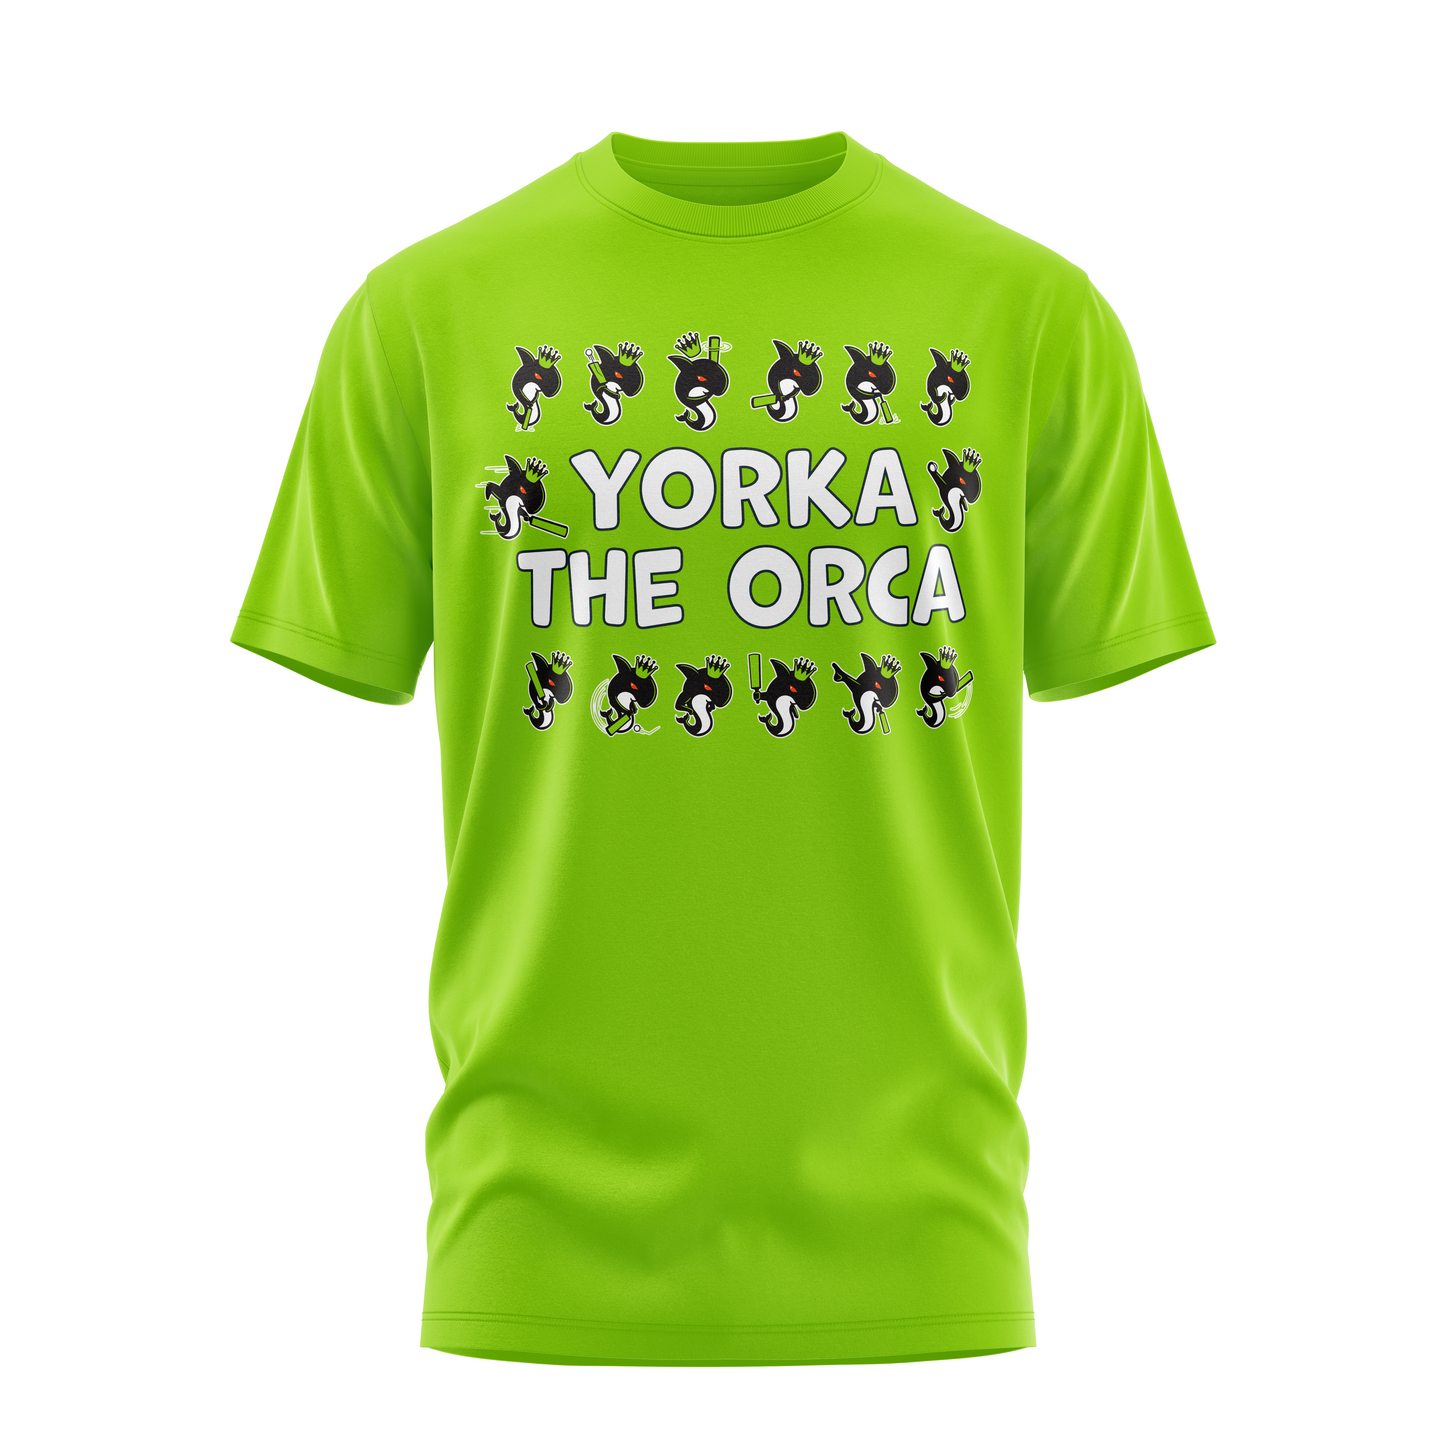 Yorka the Orca | T-Shirt | Emerald Green | (Unisex/Youth)